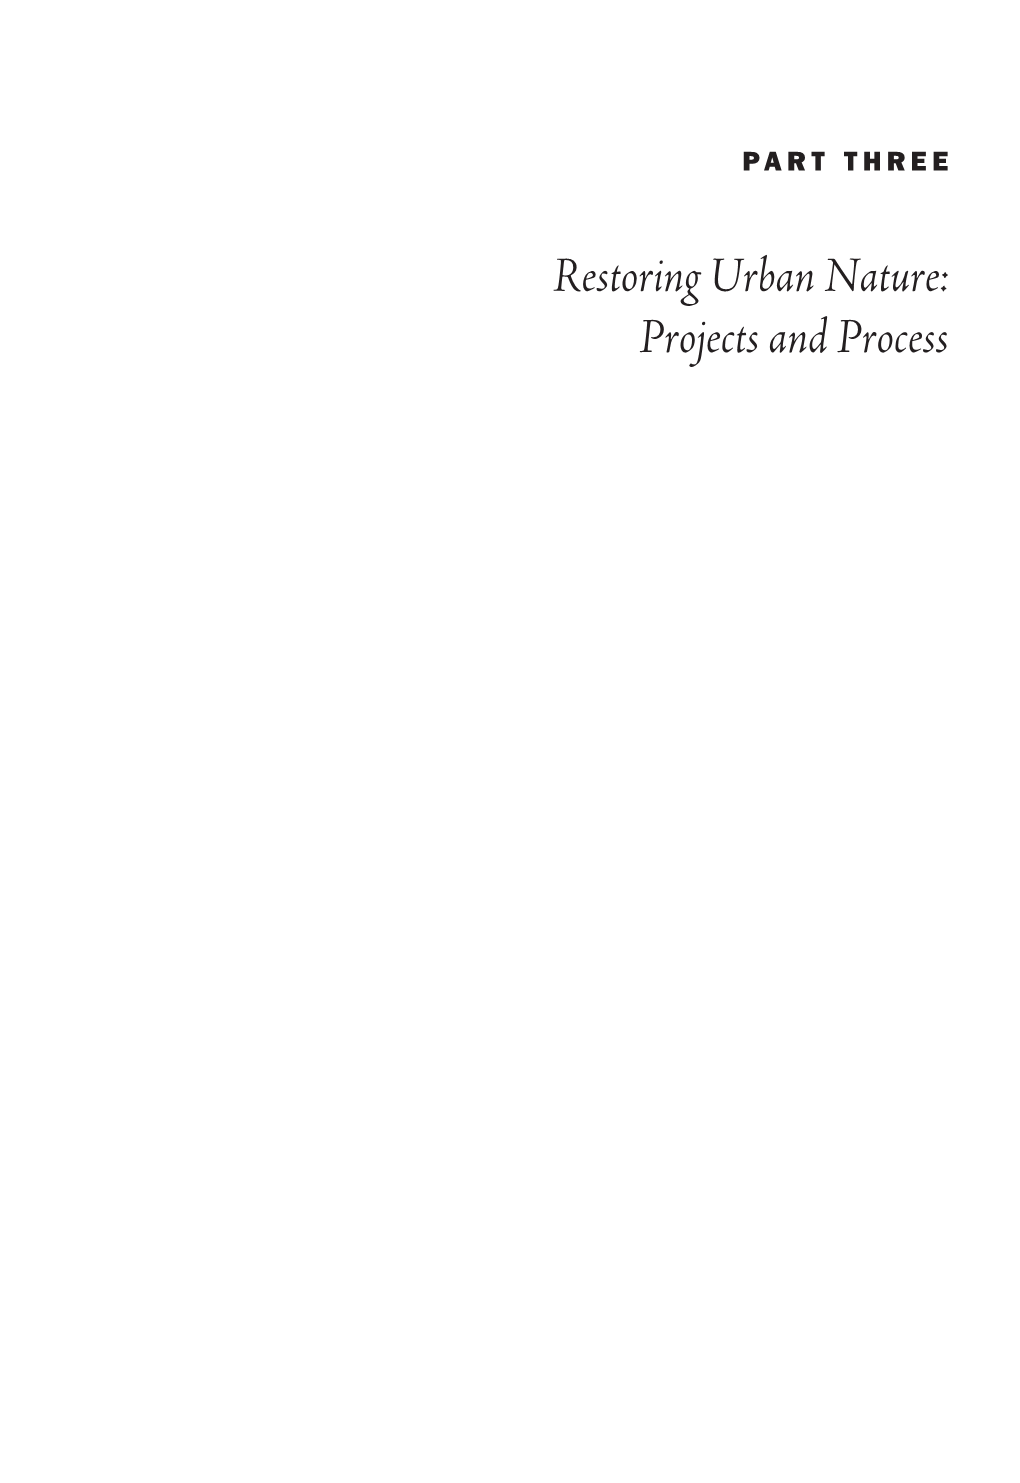 Restoring Urban Nature: Projects and Process